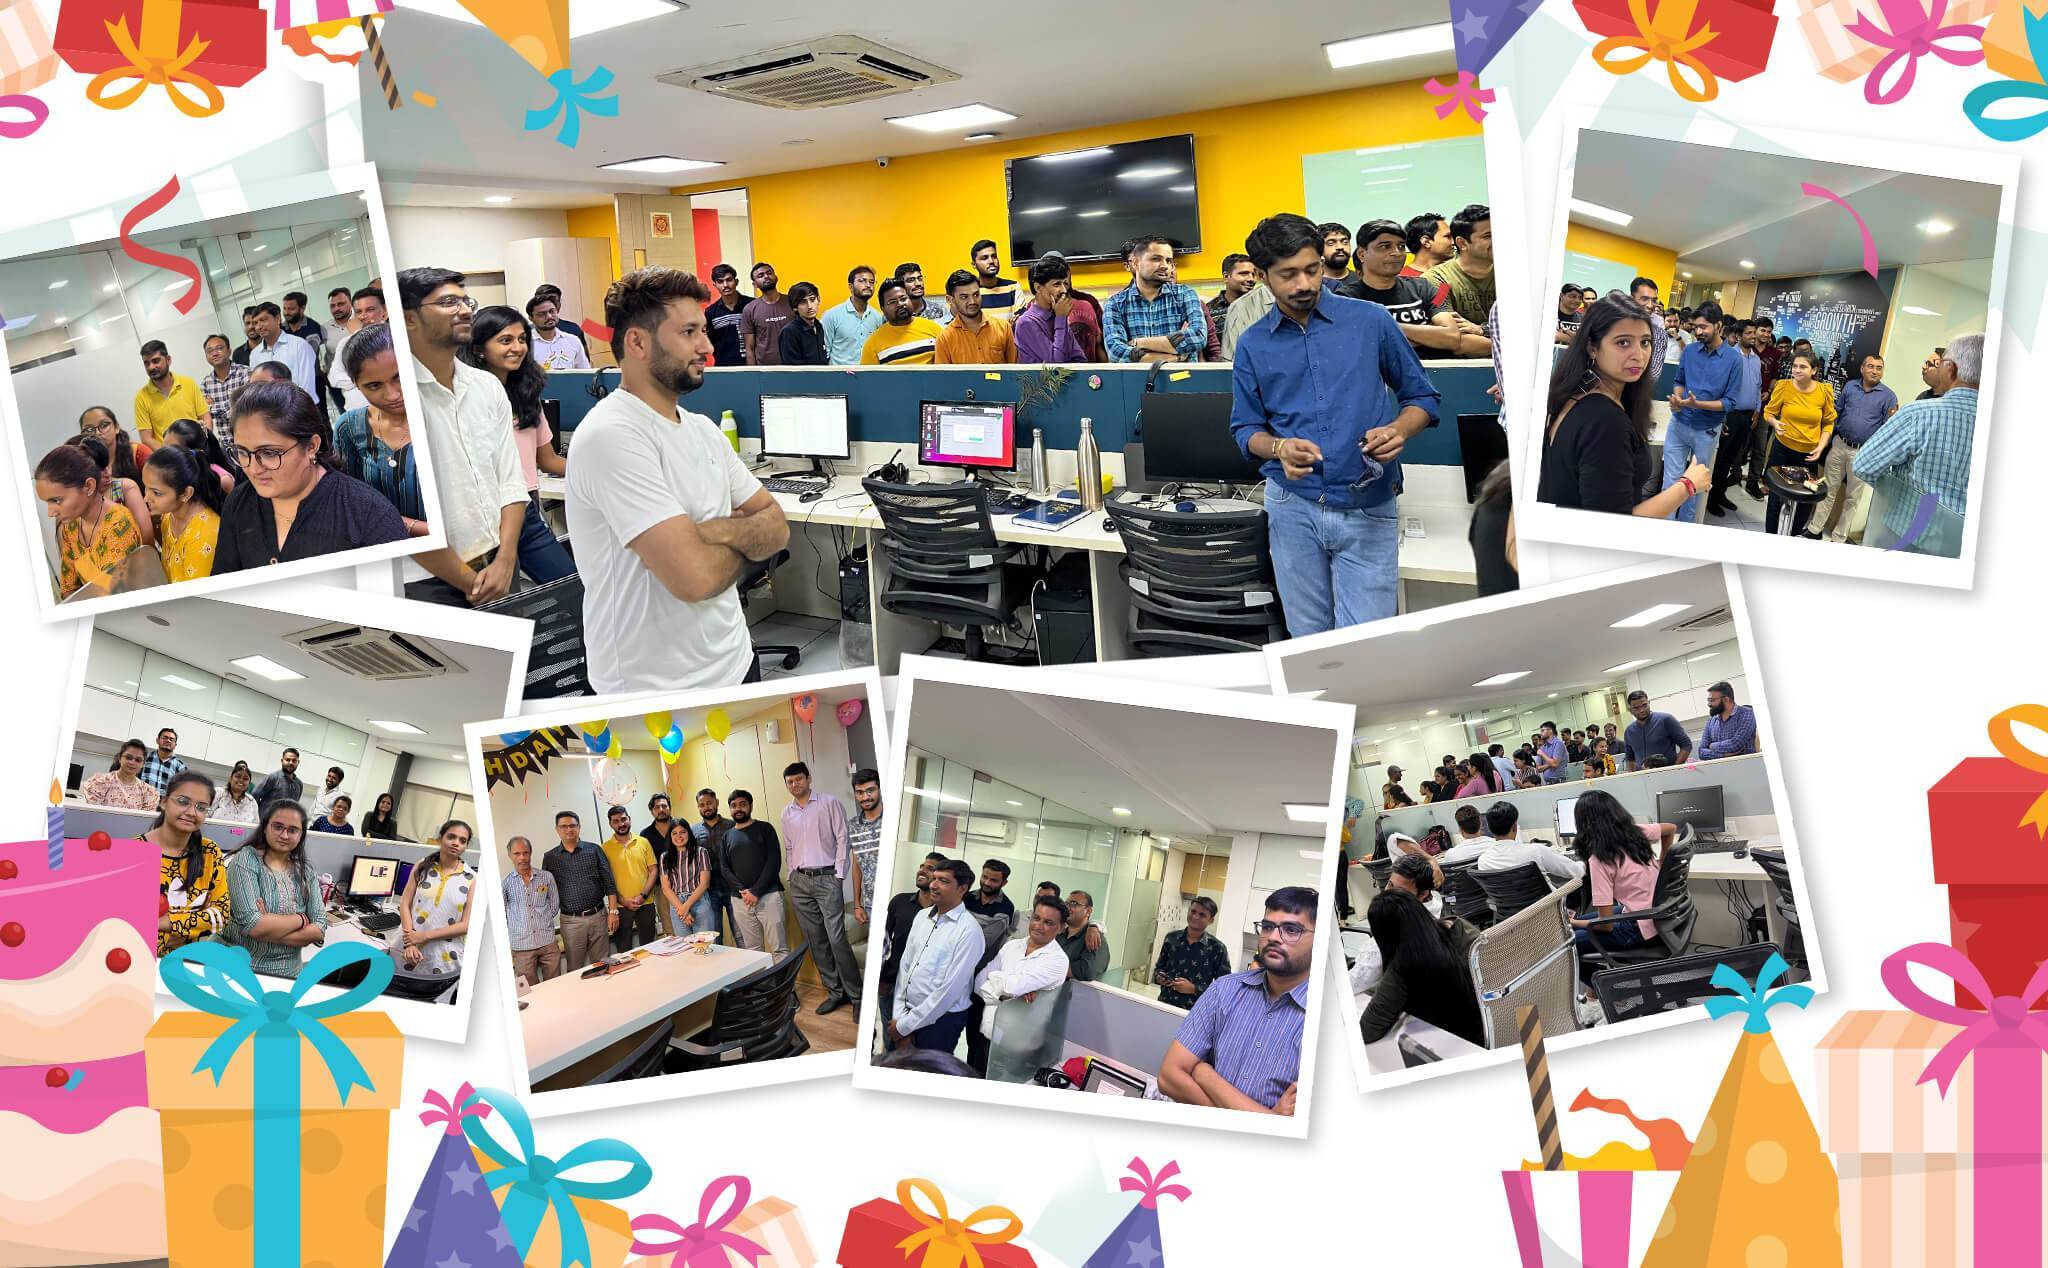 Our mentor cum leader's birthday is a day of celebration for all of us! Silicon family enjoys the boss' birthday with the utmost joy.